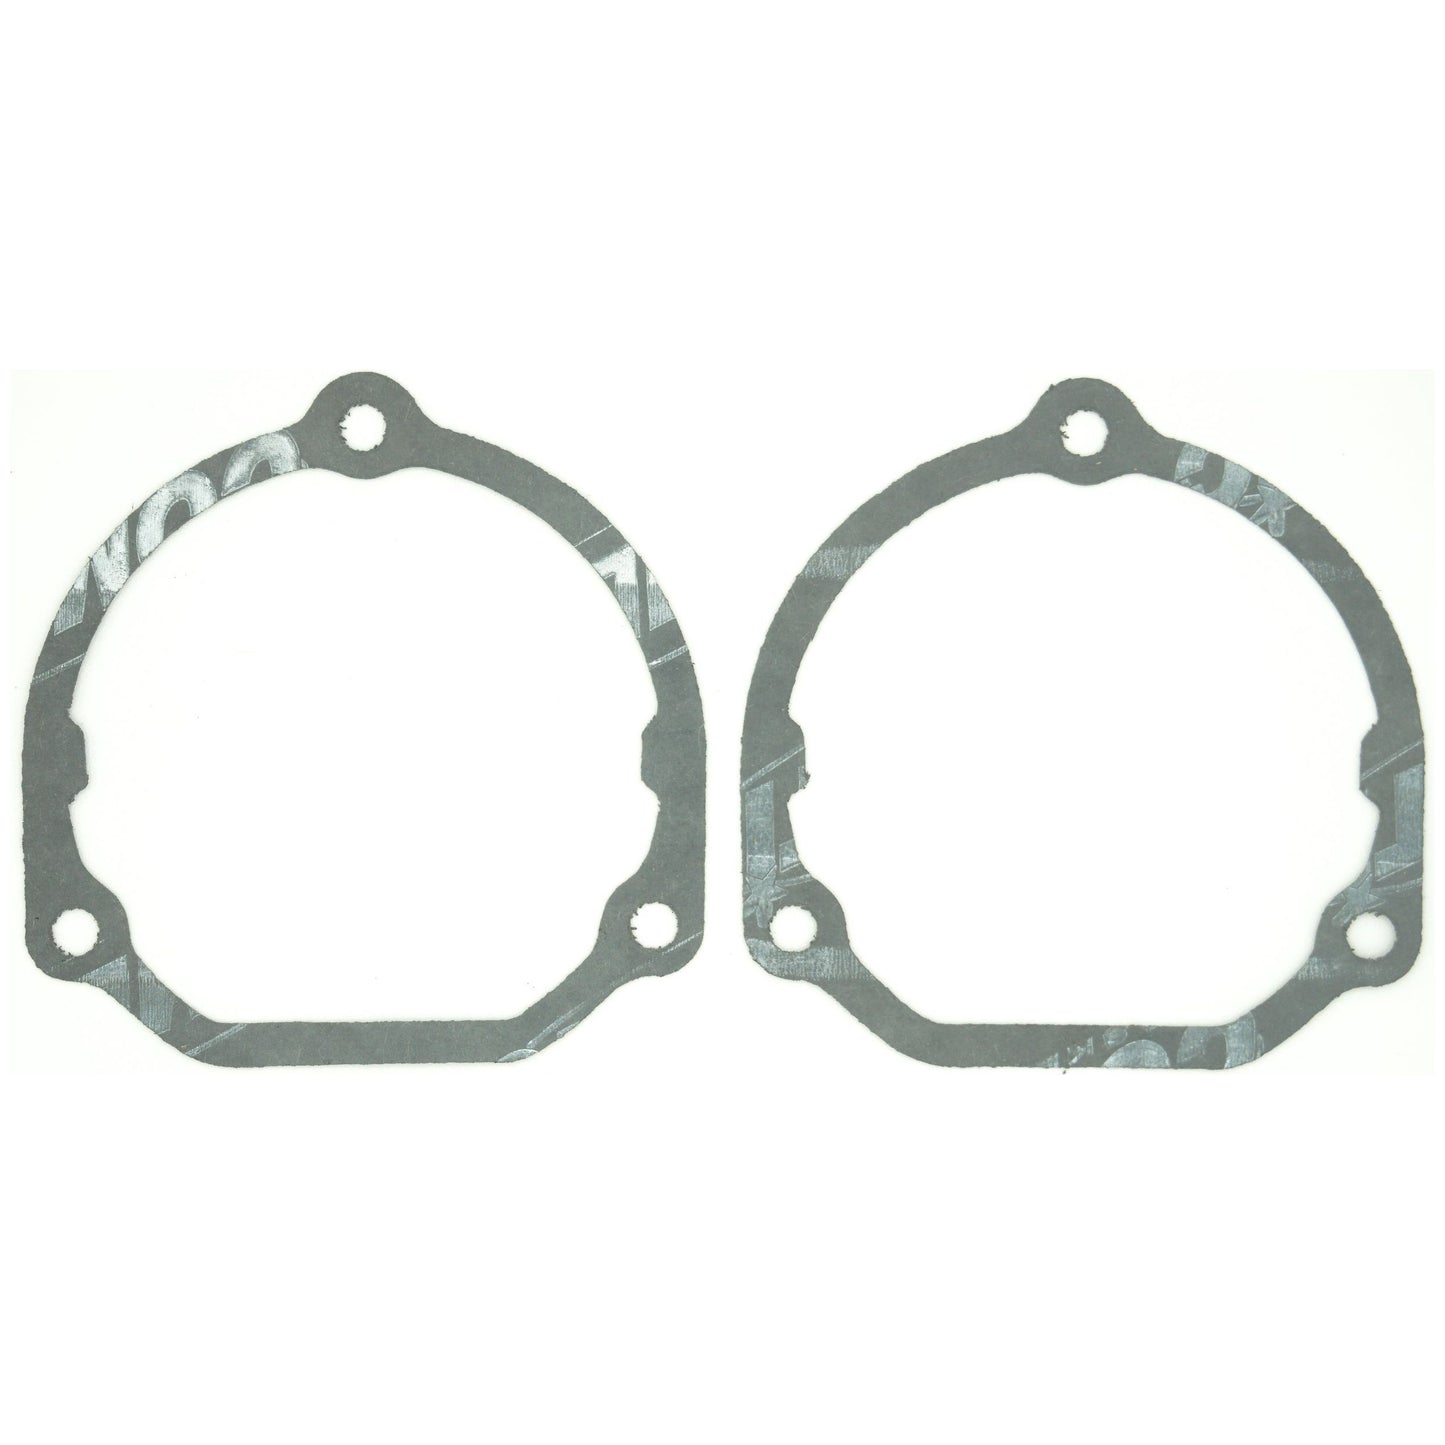 Honda CBX Crank Cap Gaskets - Cometic Made in USA with Viton Orings